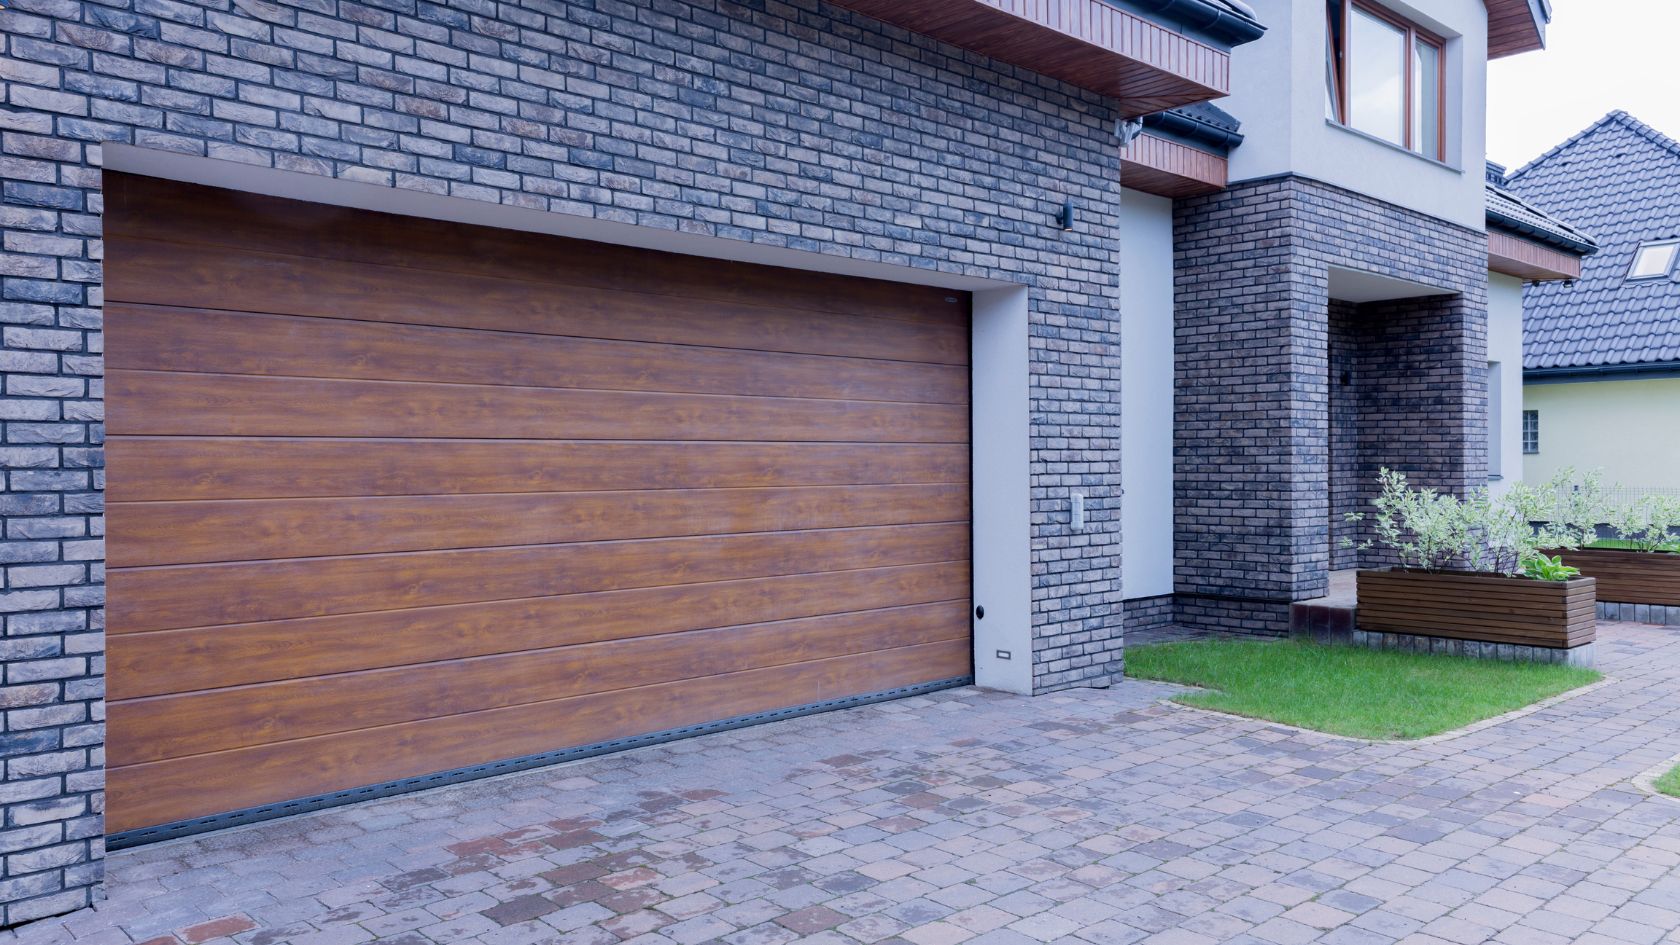 A brick house with a wooden garage door